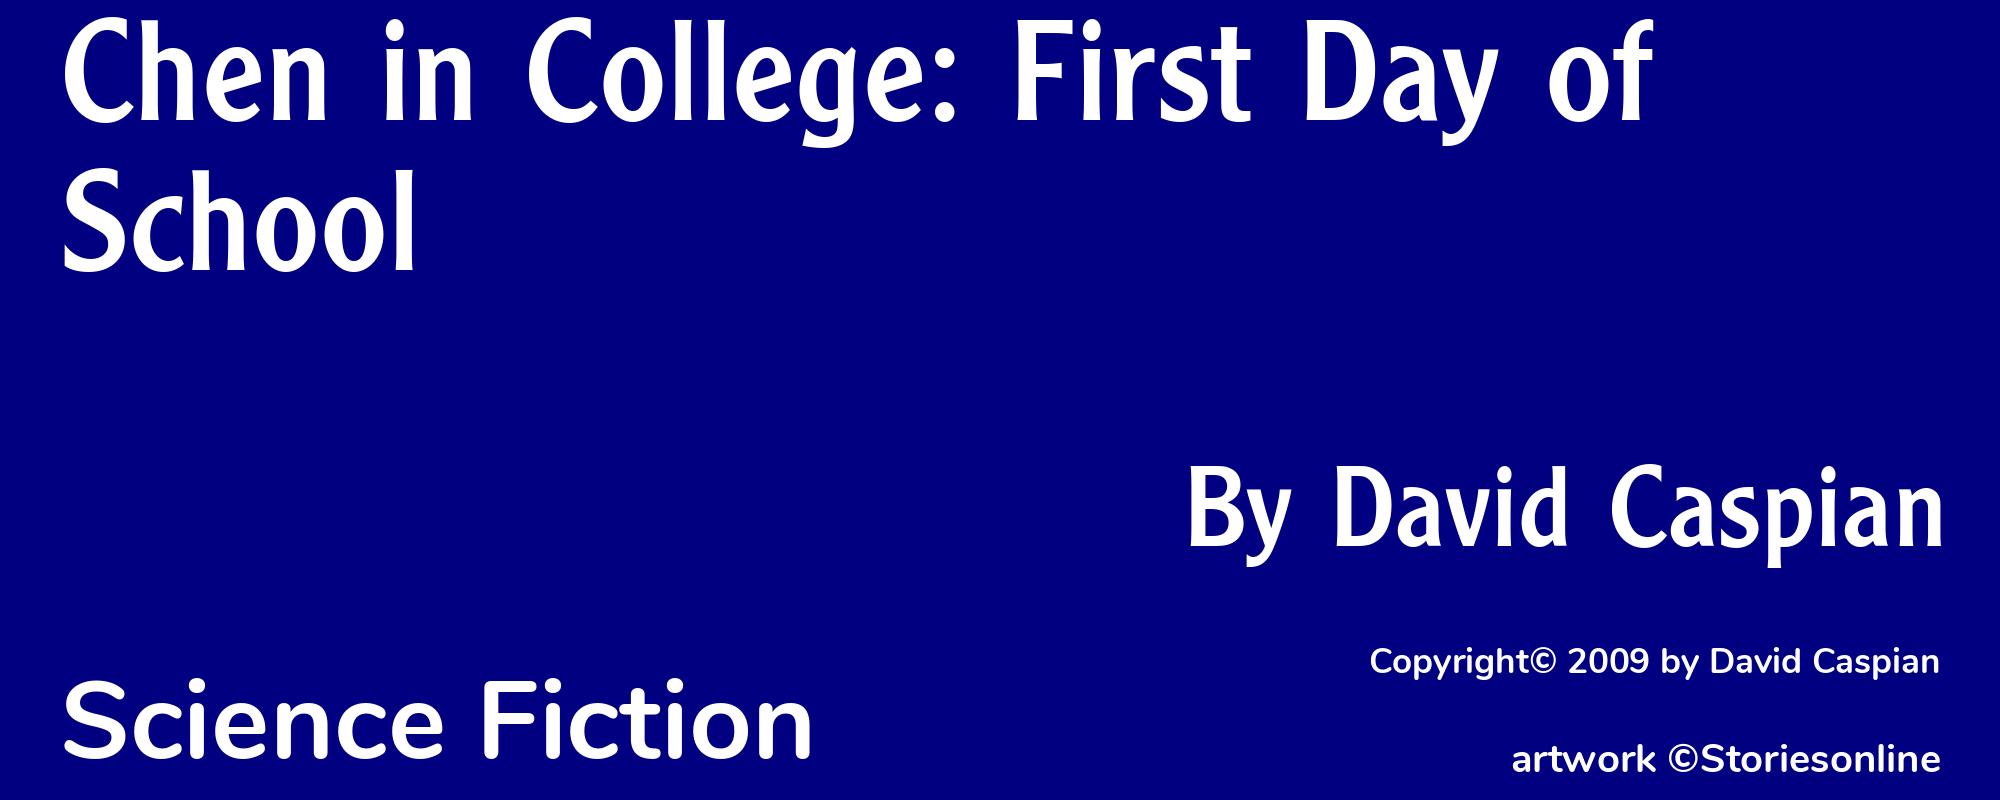 Chen in College: First Day of School - Cover